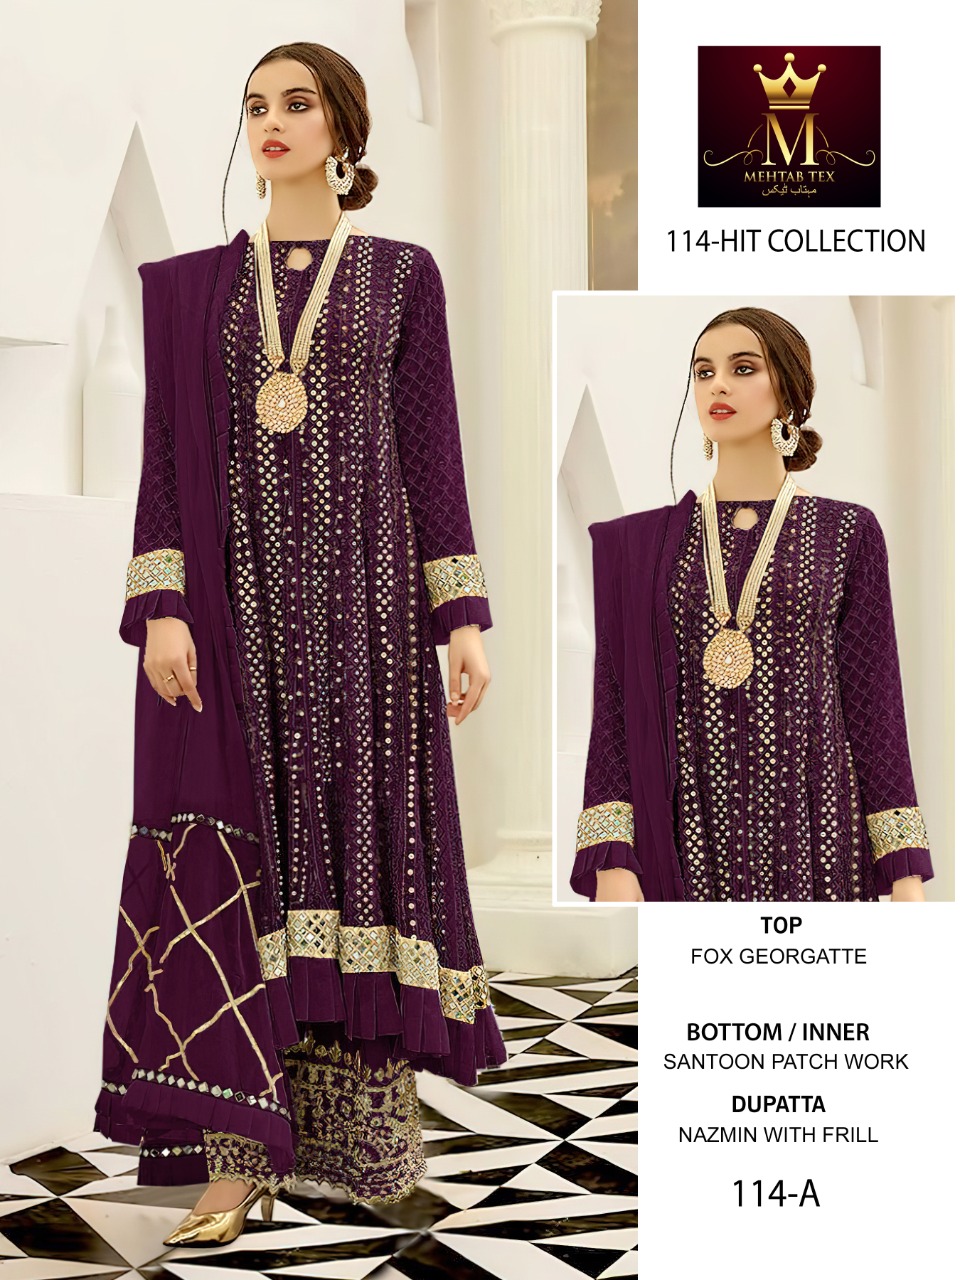 Mehtab Tex Hit Collection 114-A